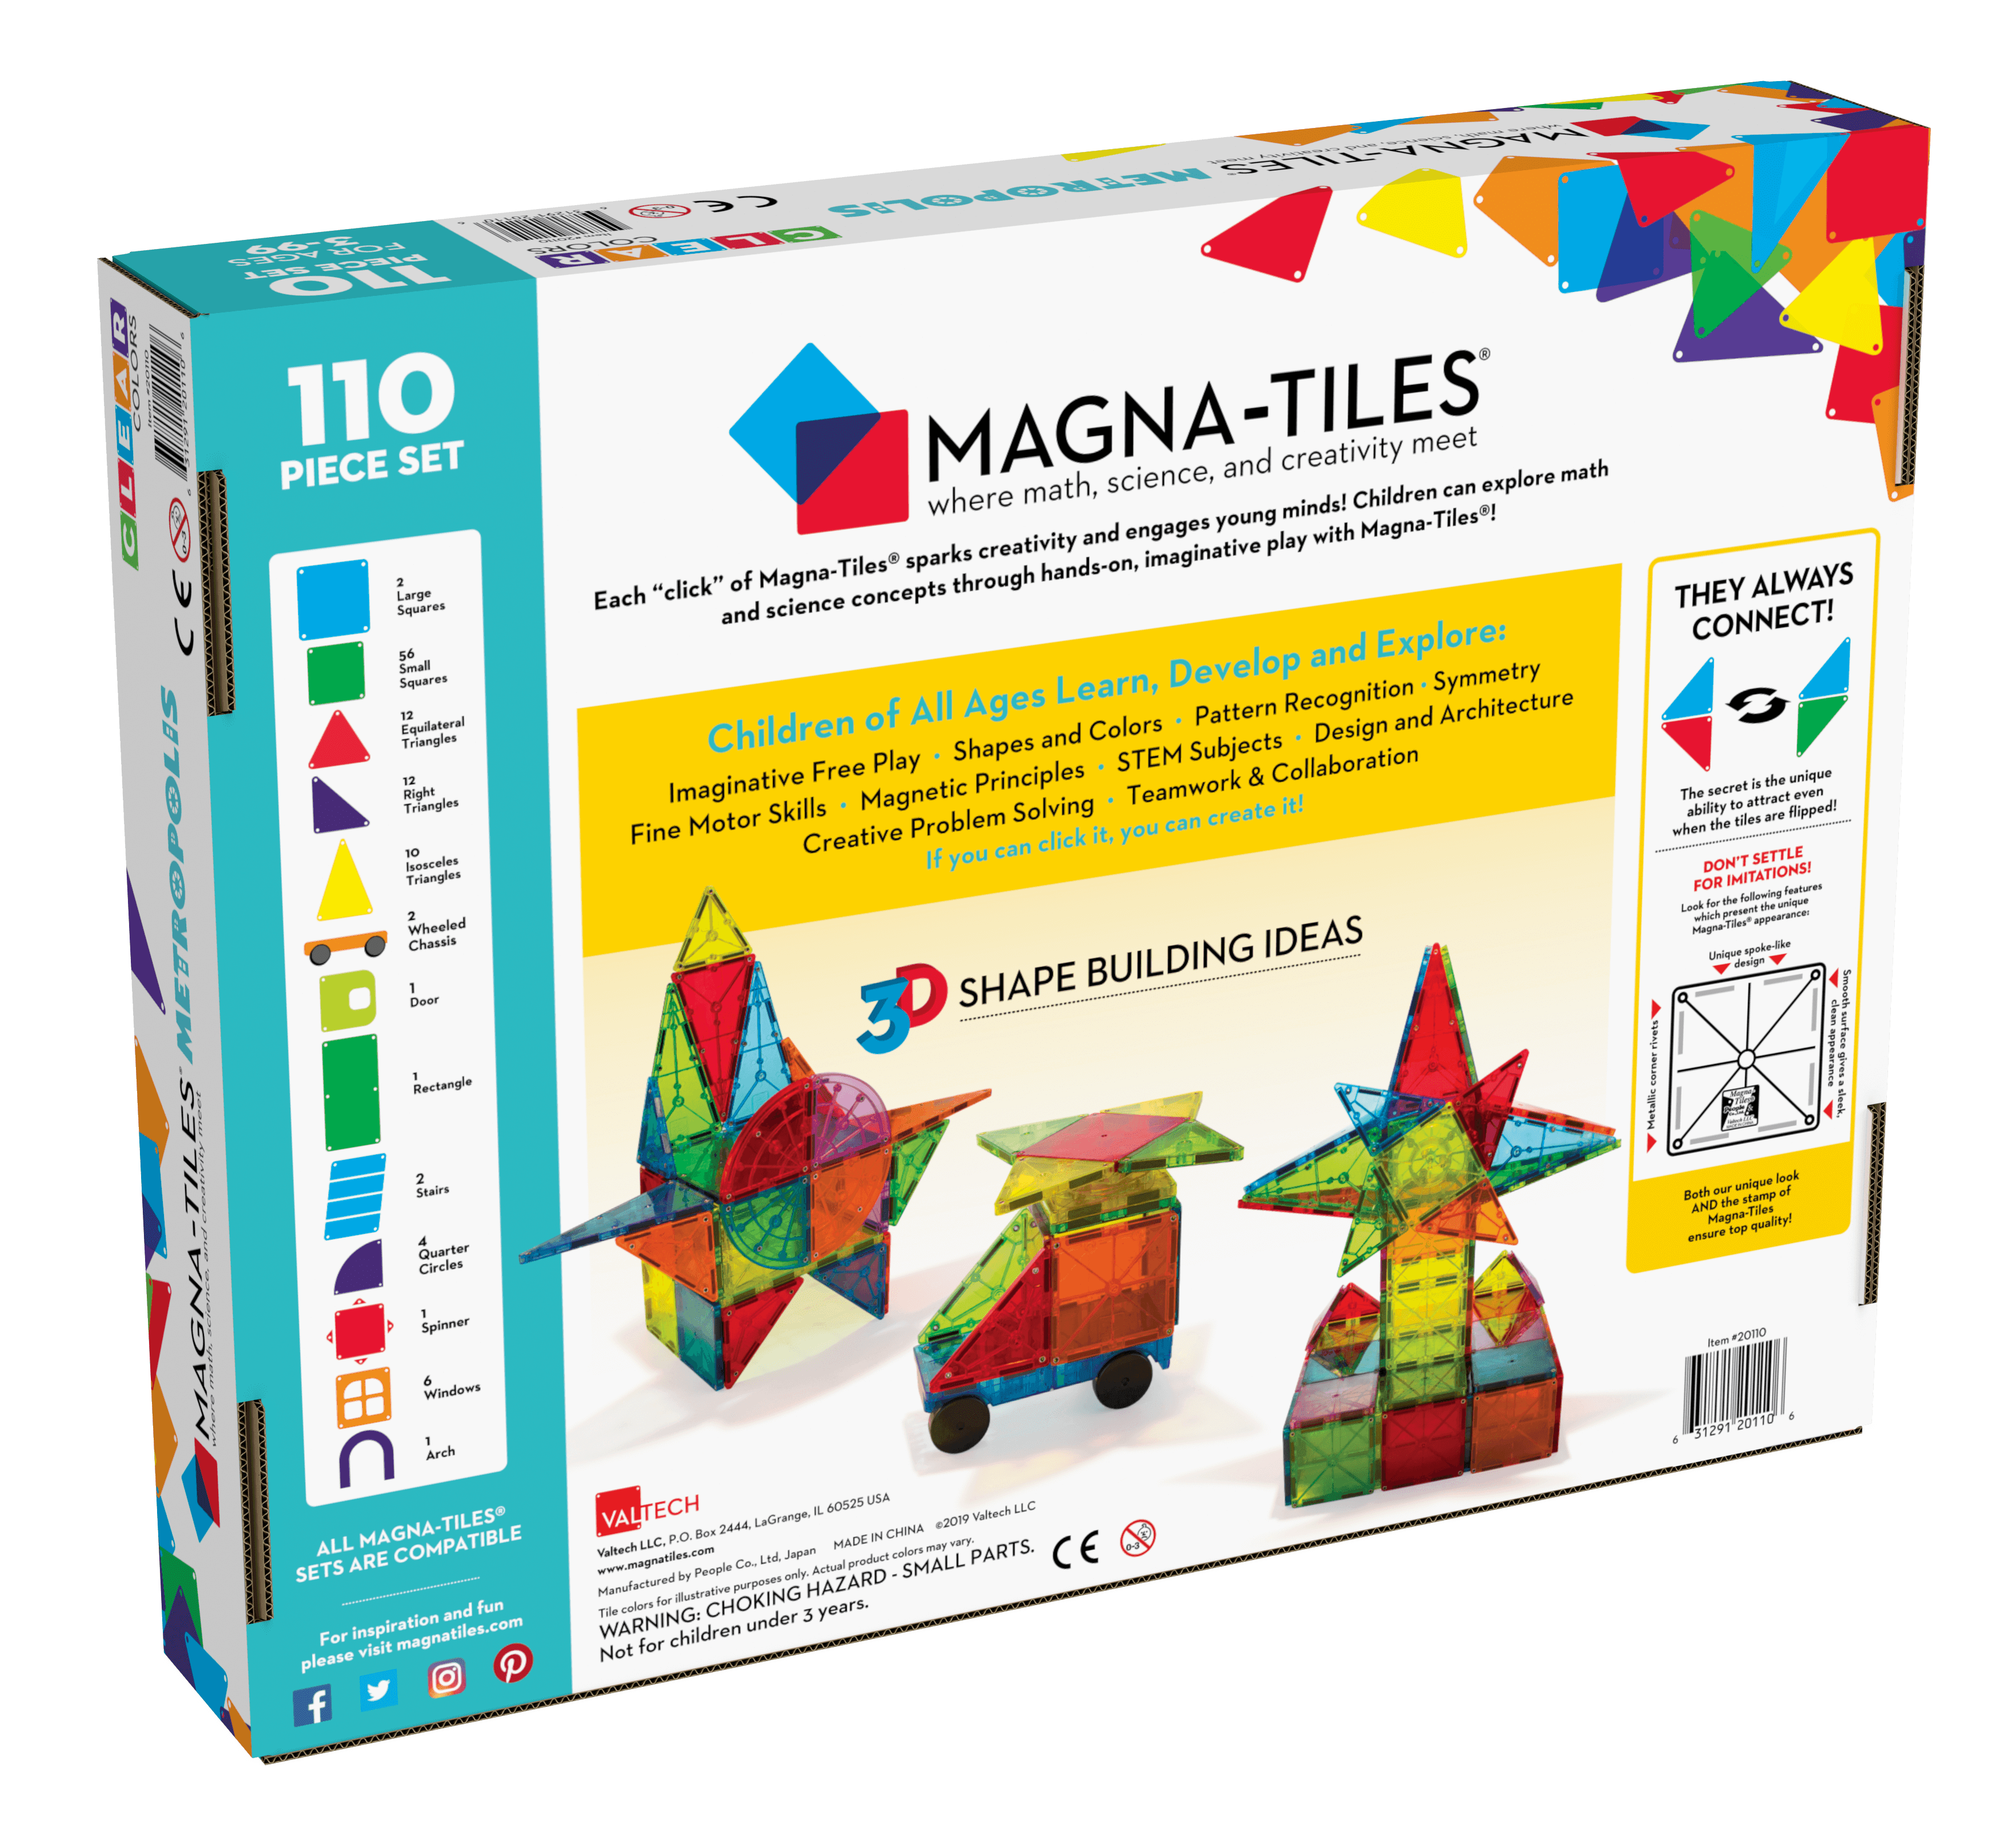 Magna-Tiles® Metropolis 110-Piece Set - Why and Whale